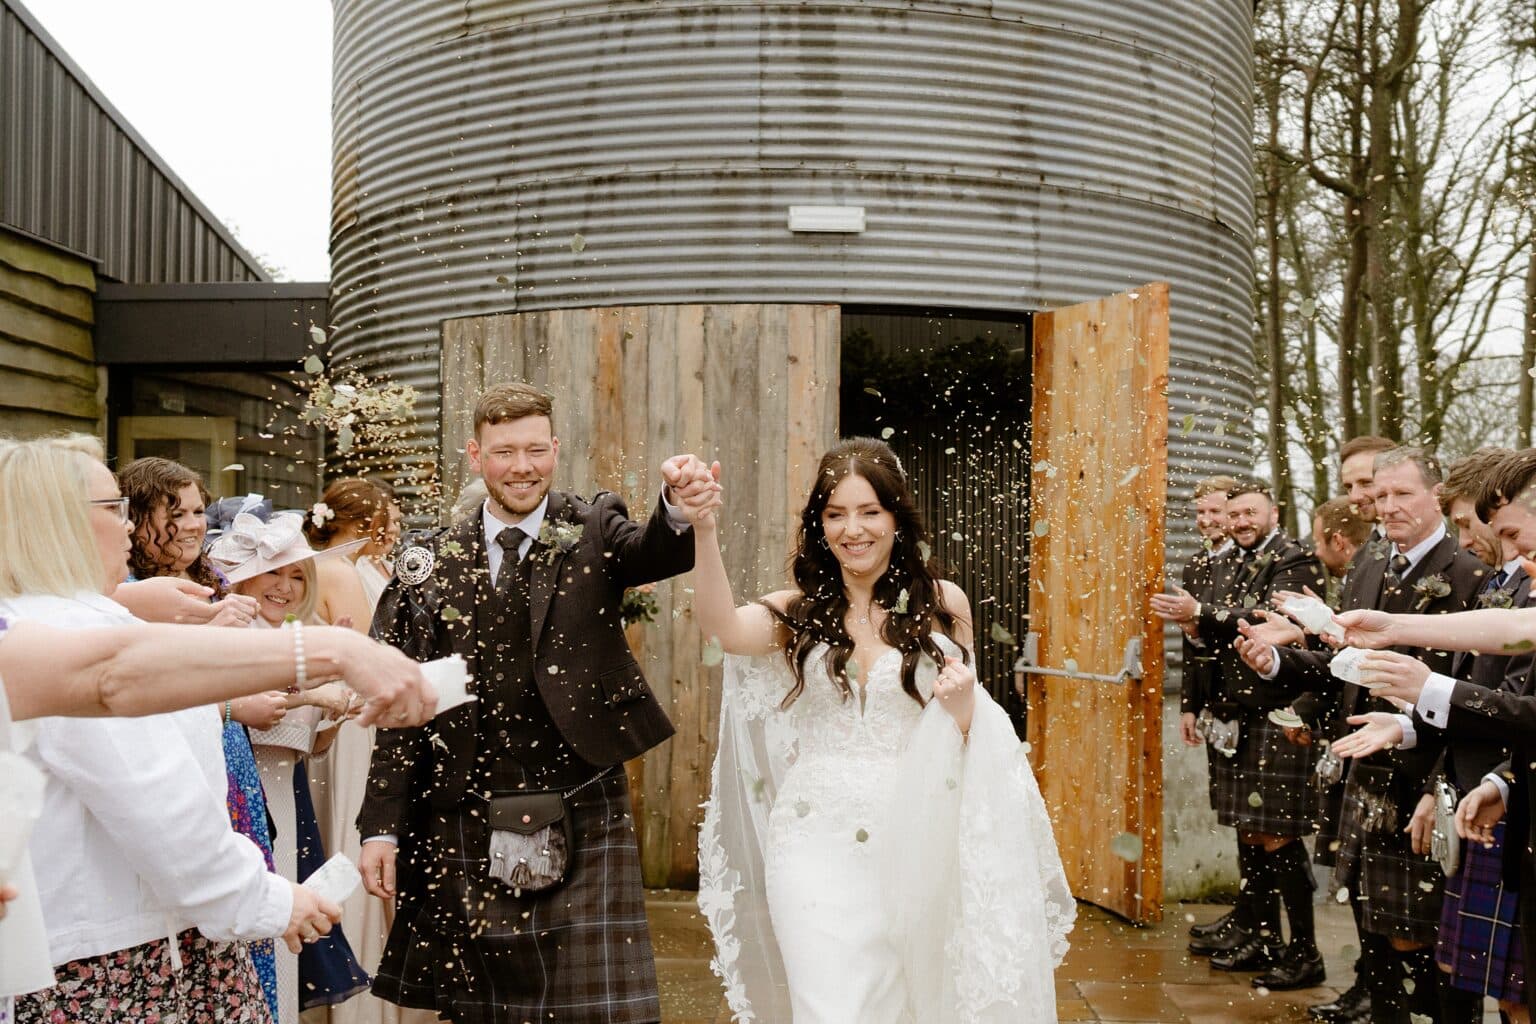 guests toss confetti as the newly married bride and groom exit the barn wedding venues west lothian smiling and holding hands